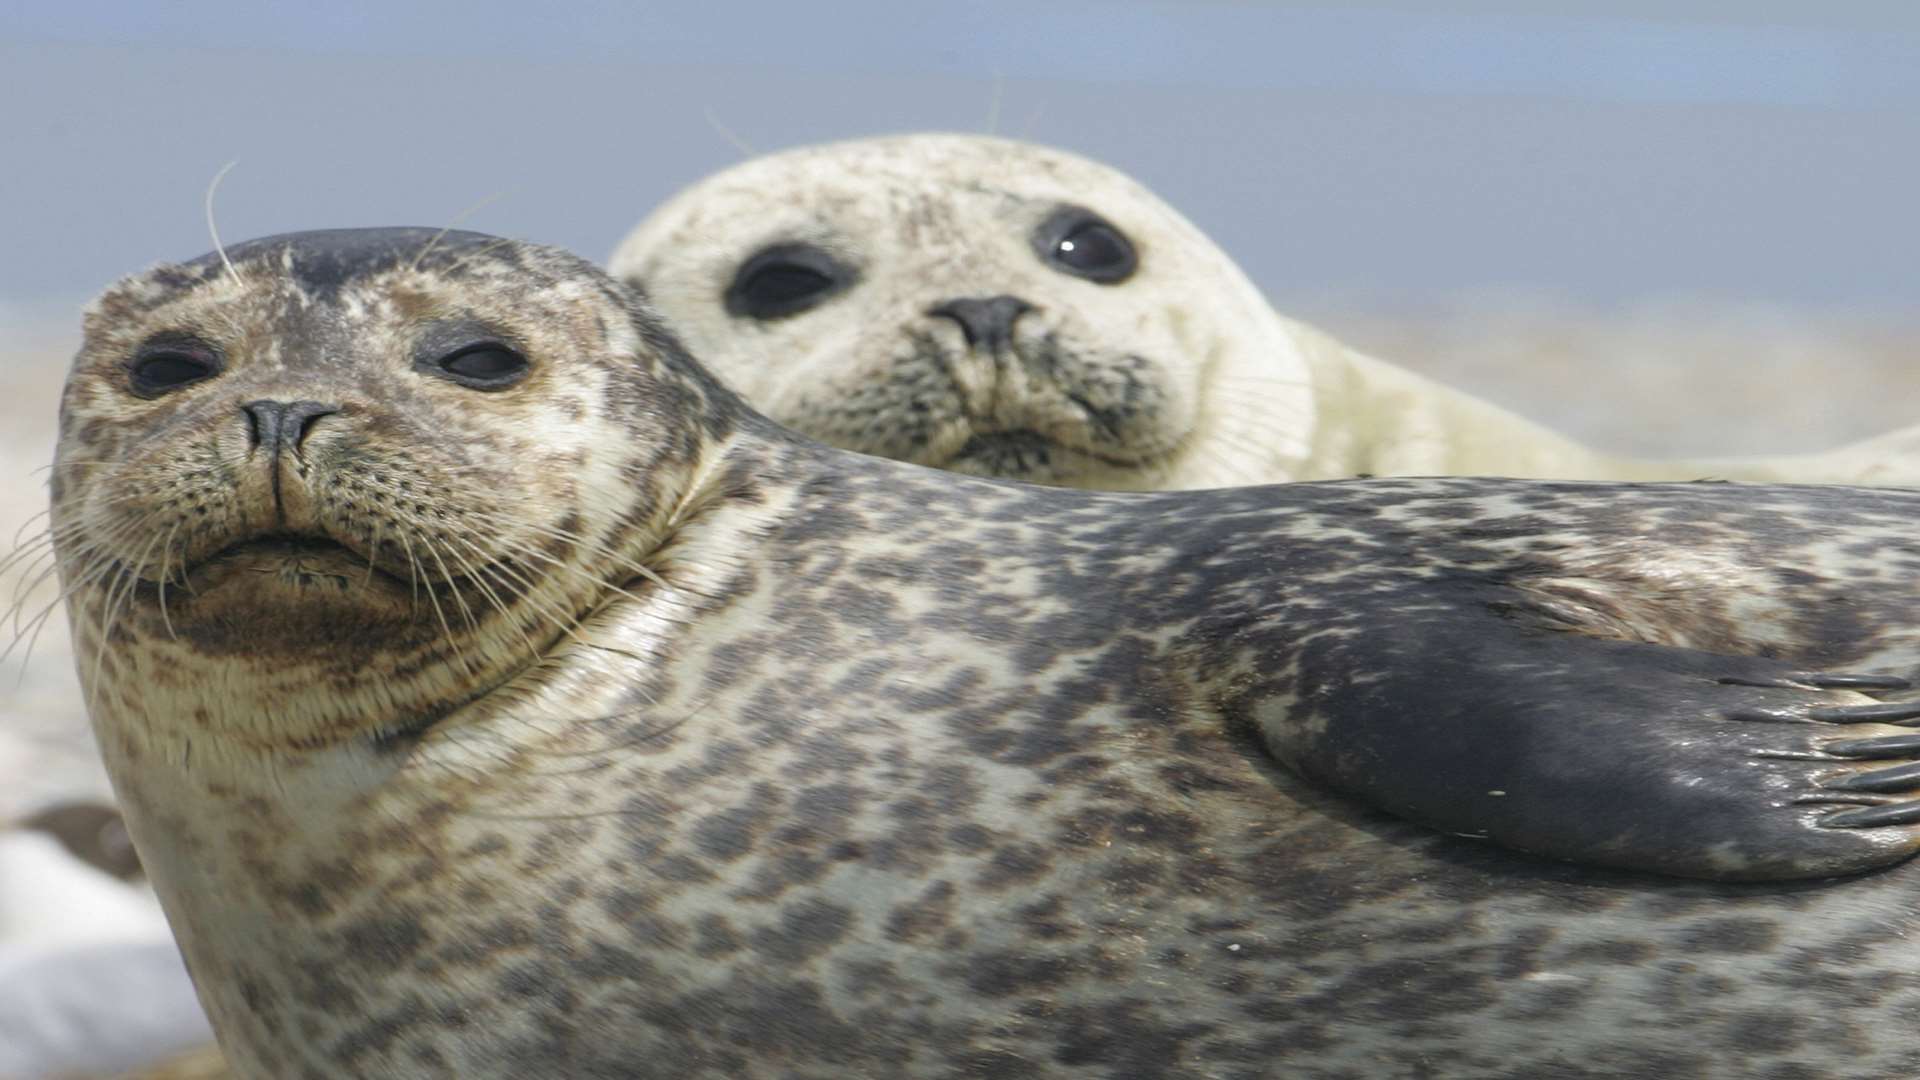 Little ones will love to look at the seals